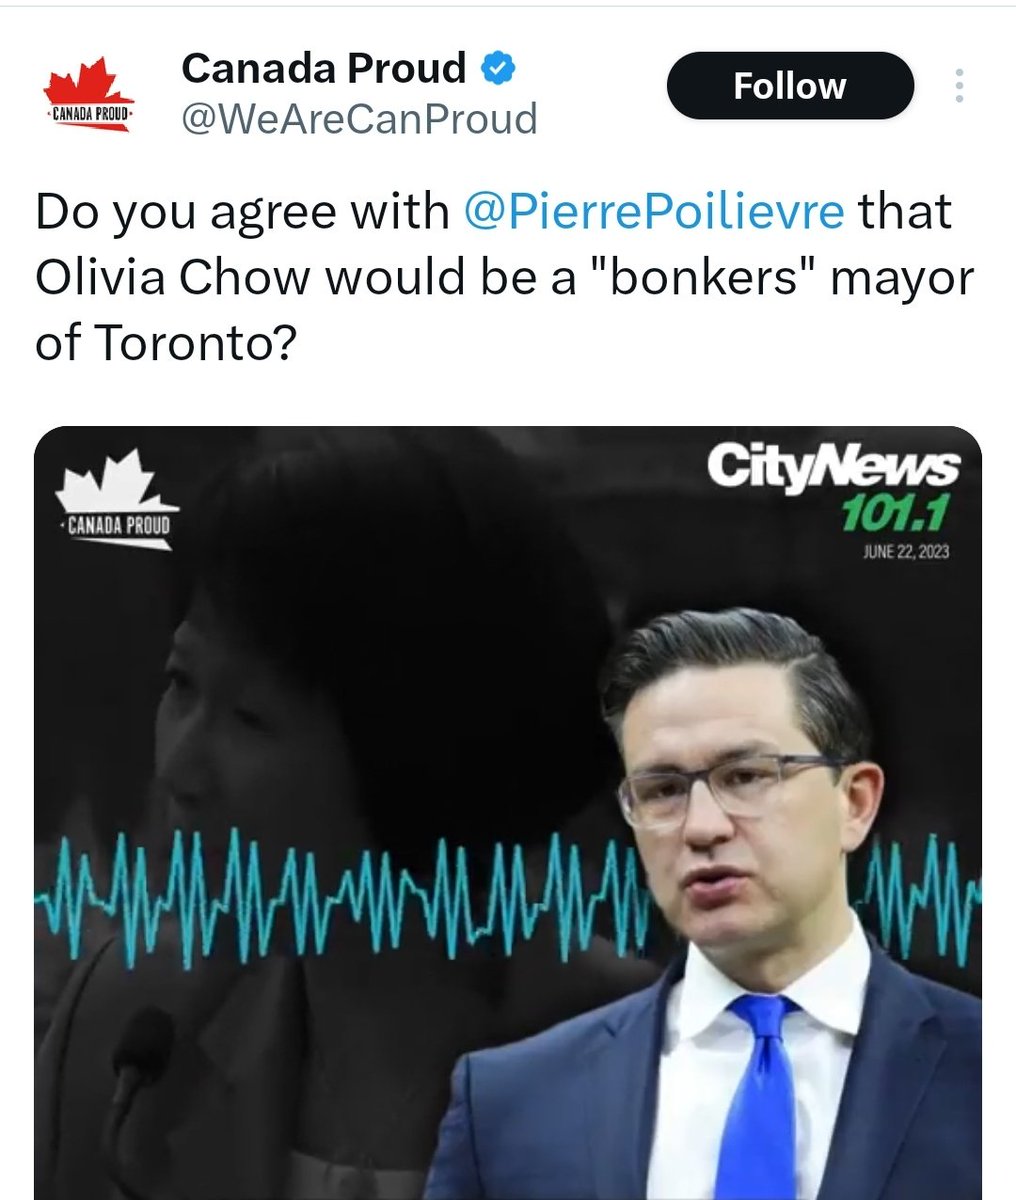 Canada Proud and Pierre Poilievre that's 2x the misogyny.